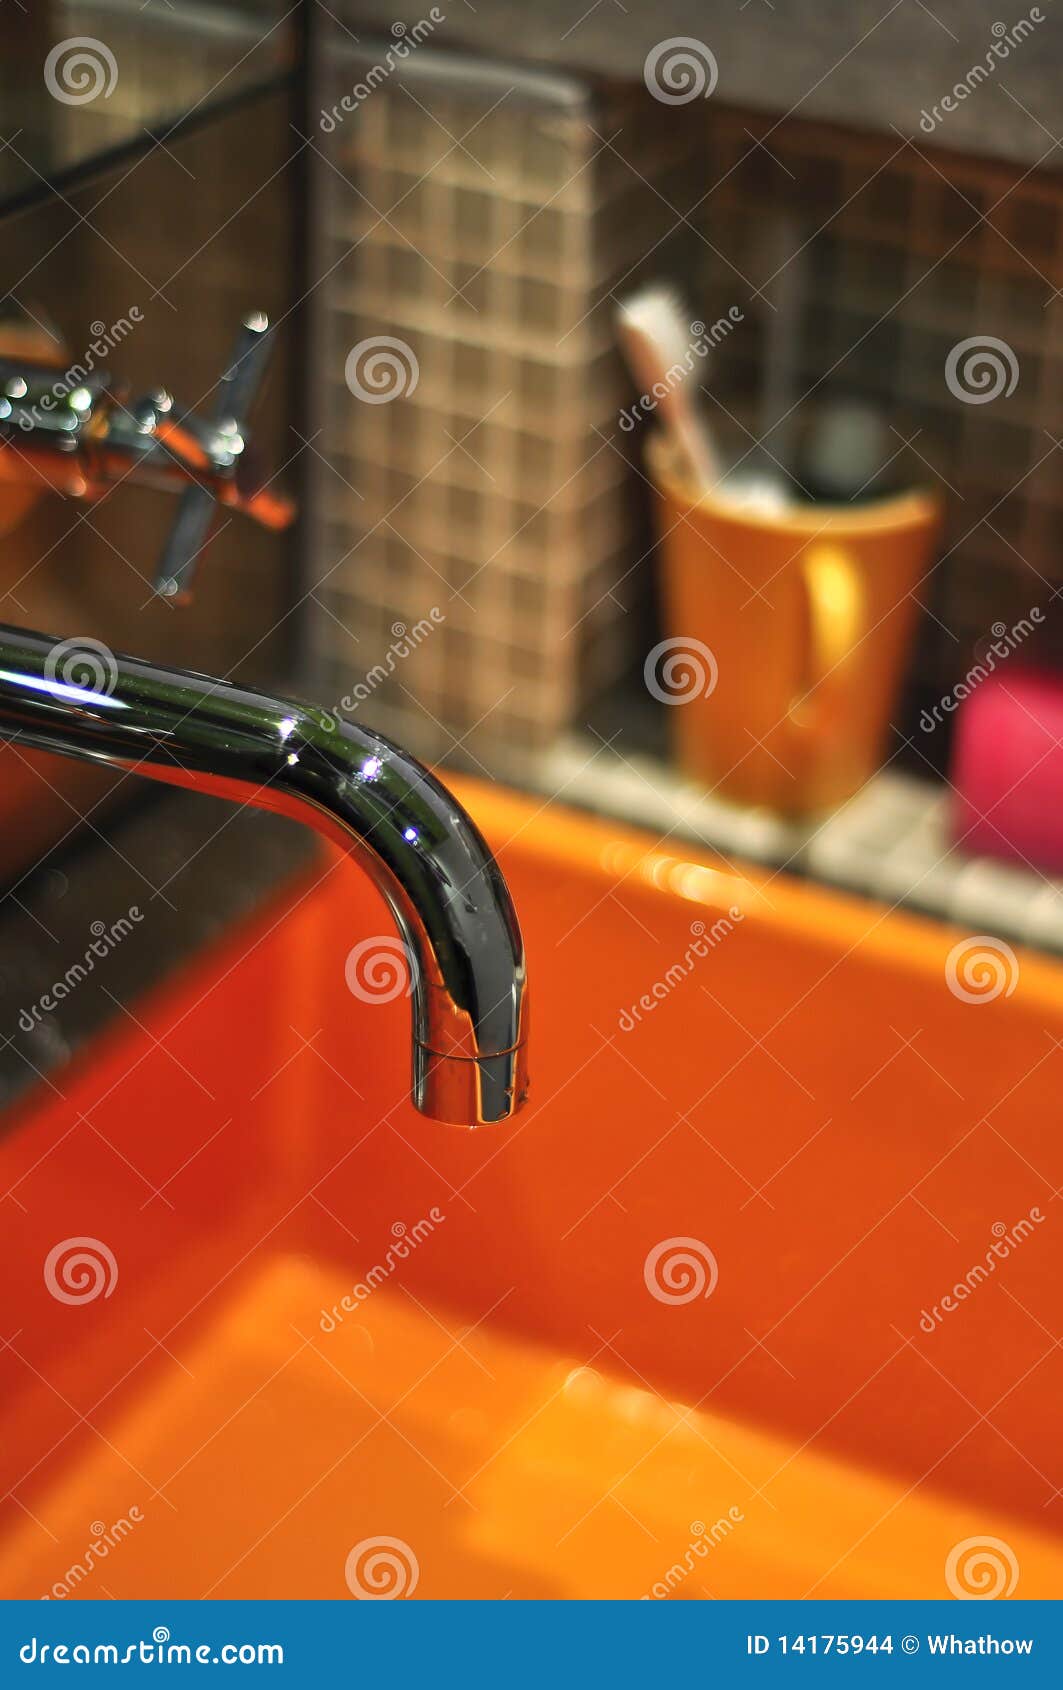 silver tap with orange basin and toiletries